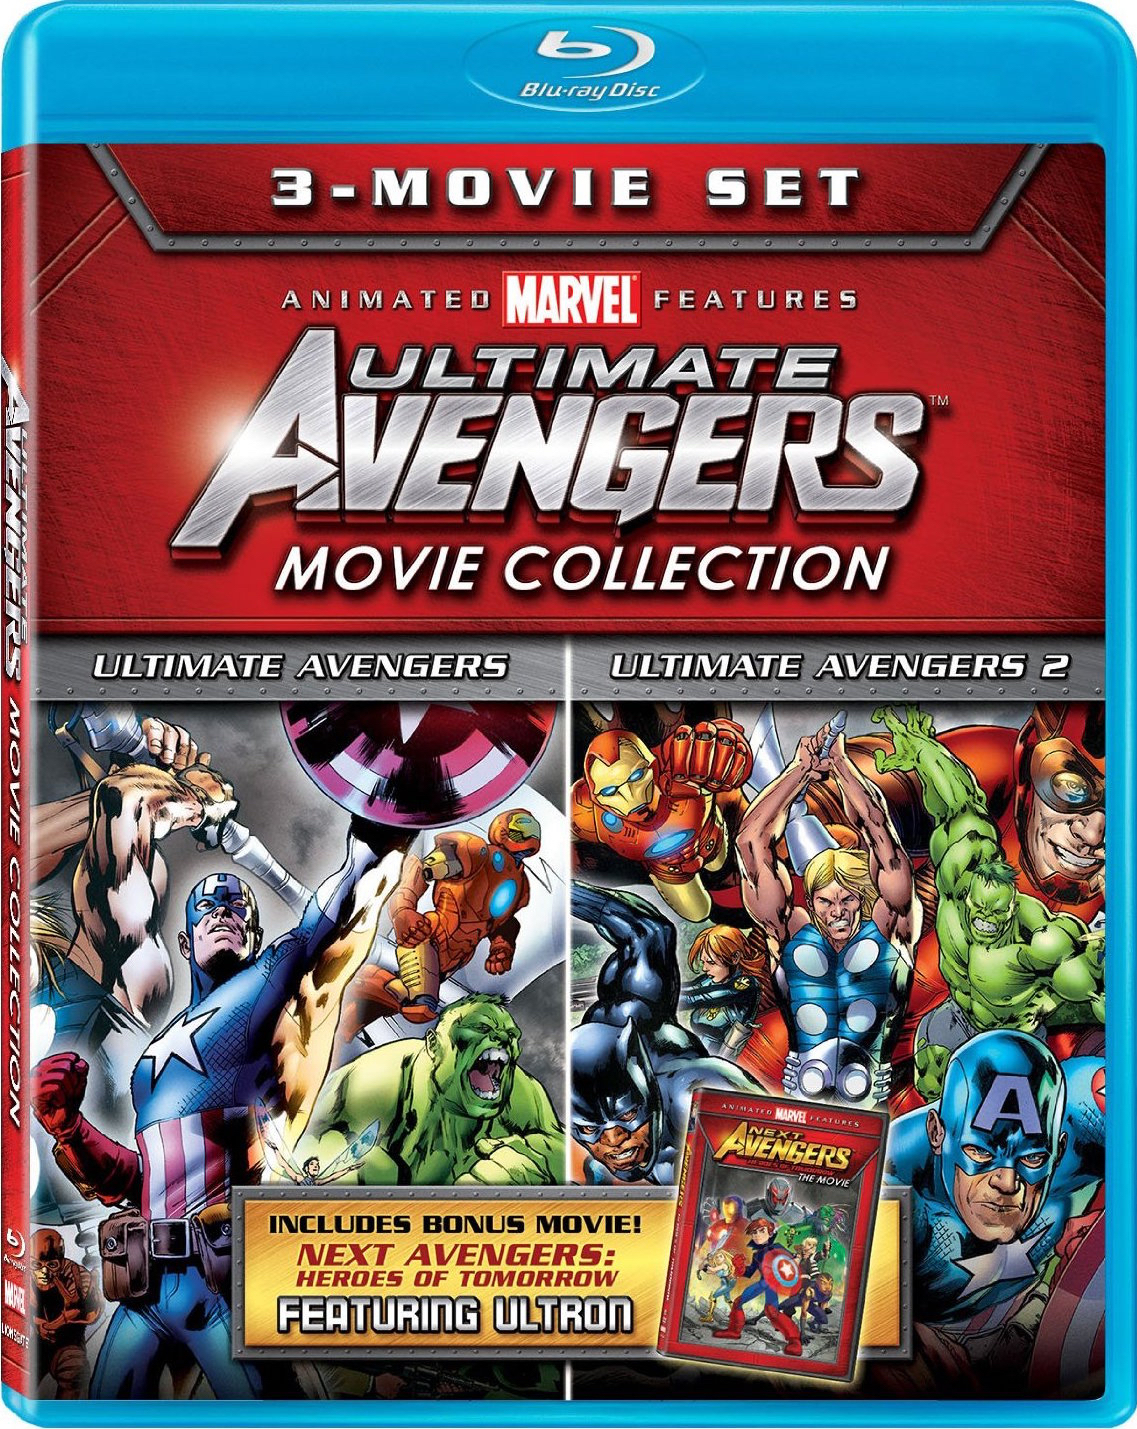 Vengadores - Ultimate Avengers: 3-Movie Collection (2006-2008) Vengadores Ultimate: Colección de 3 Películas (2006-2008) [AC3 2.0 + SRT] [DVD-RIP] [GOOGLEDRIVE*] 124934_front